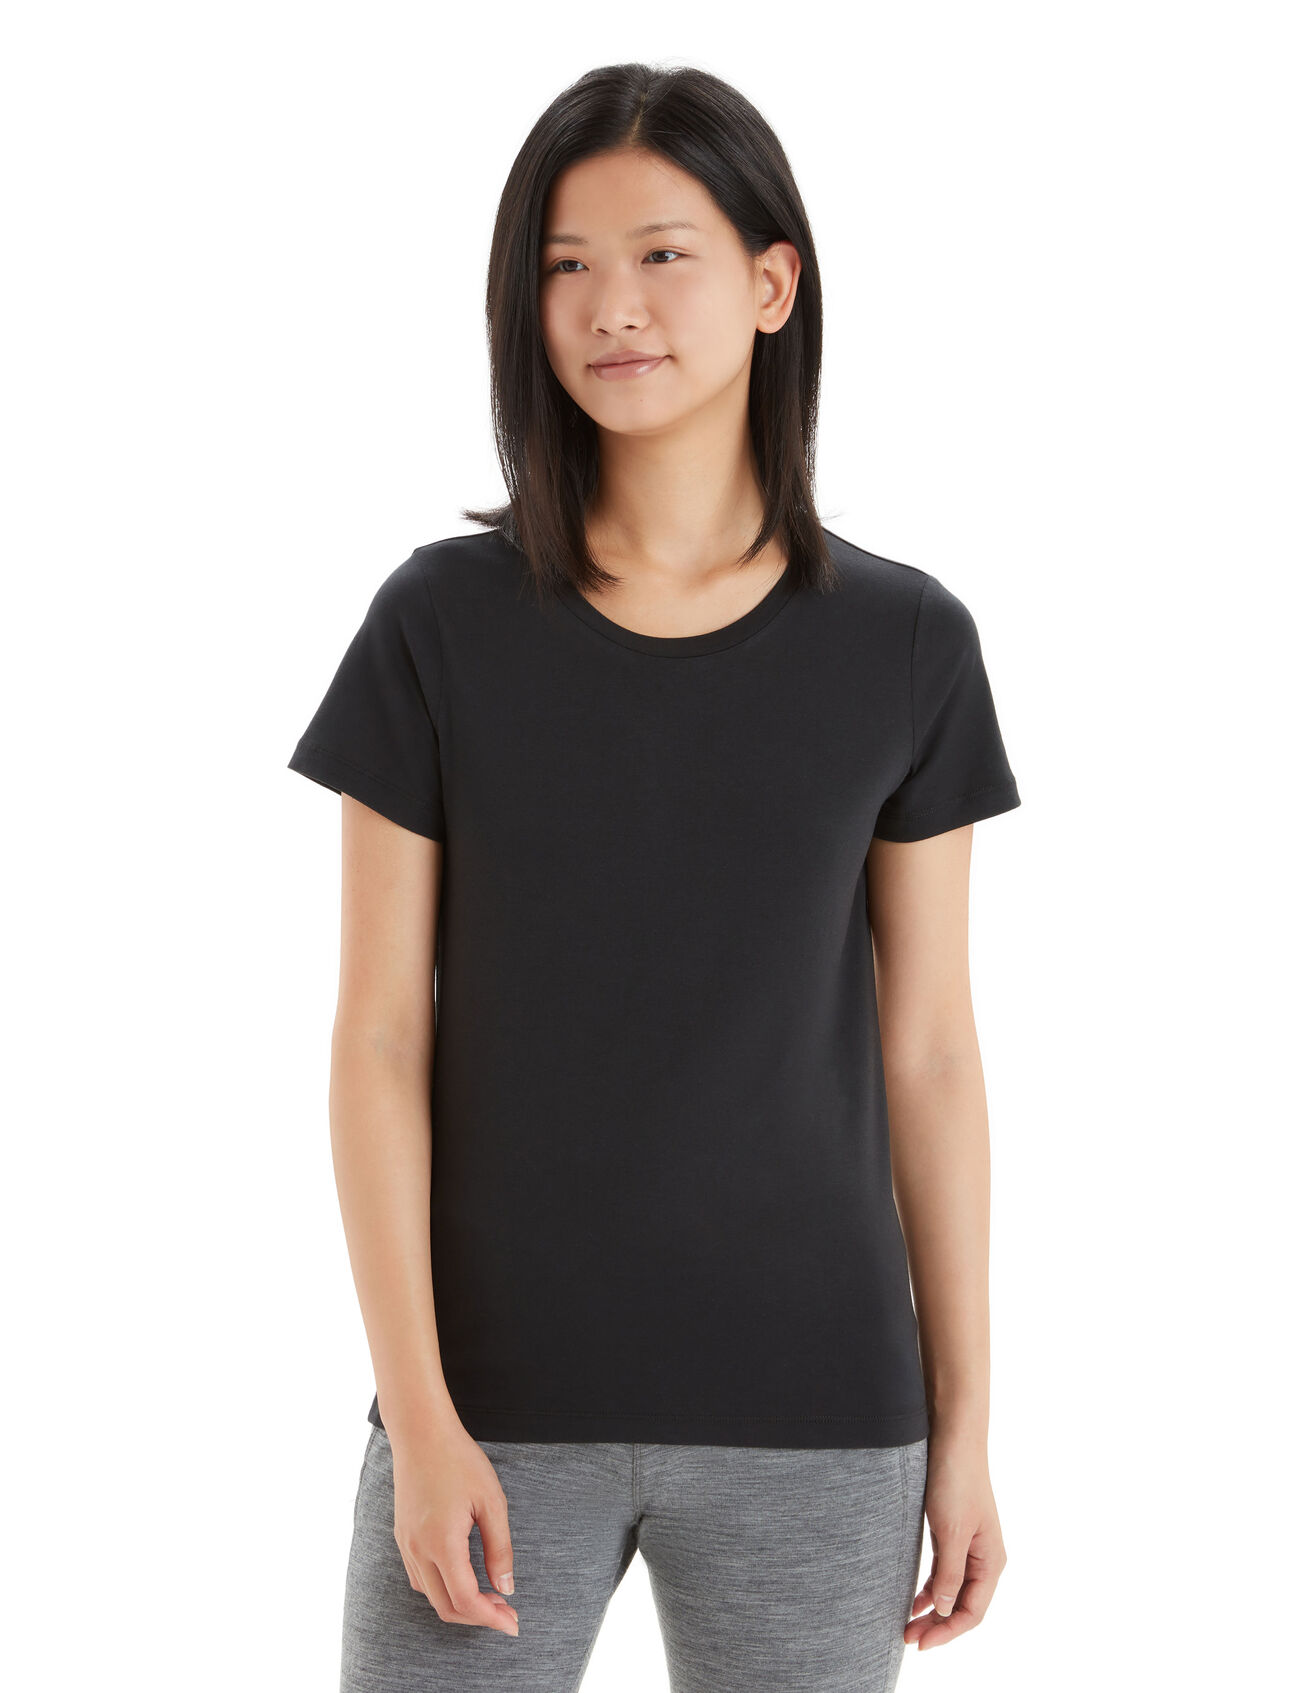 Womens Tencel Cotton Short Sleeve T-Shirt A clean and comfortable everyday tee with classic style, the TENCEL™ Cotton Short Sleeve Tee features a super-soft jersey fabric that blends organic cotton with natural TENCEL™.